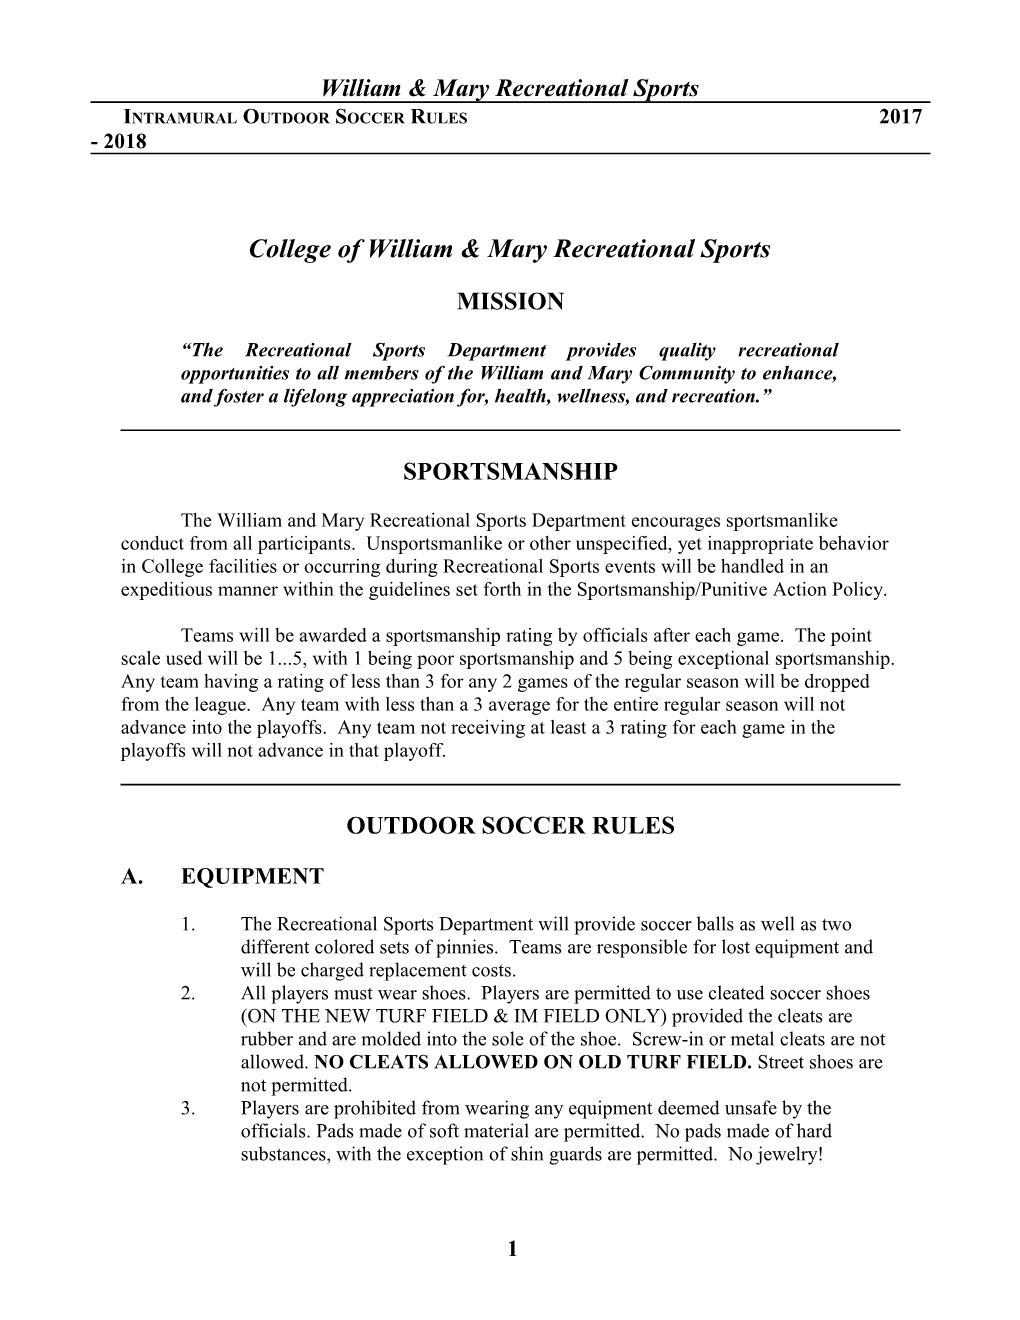 College of William & Mary Recreational Sports